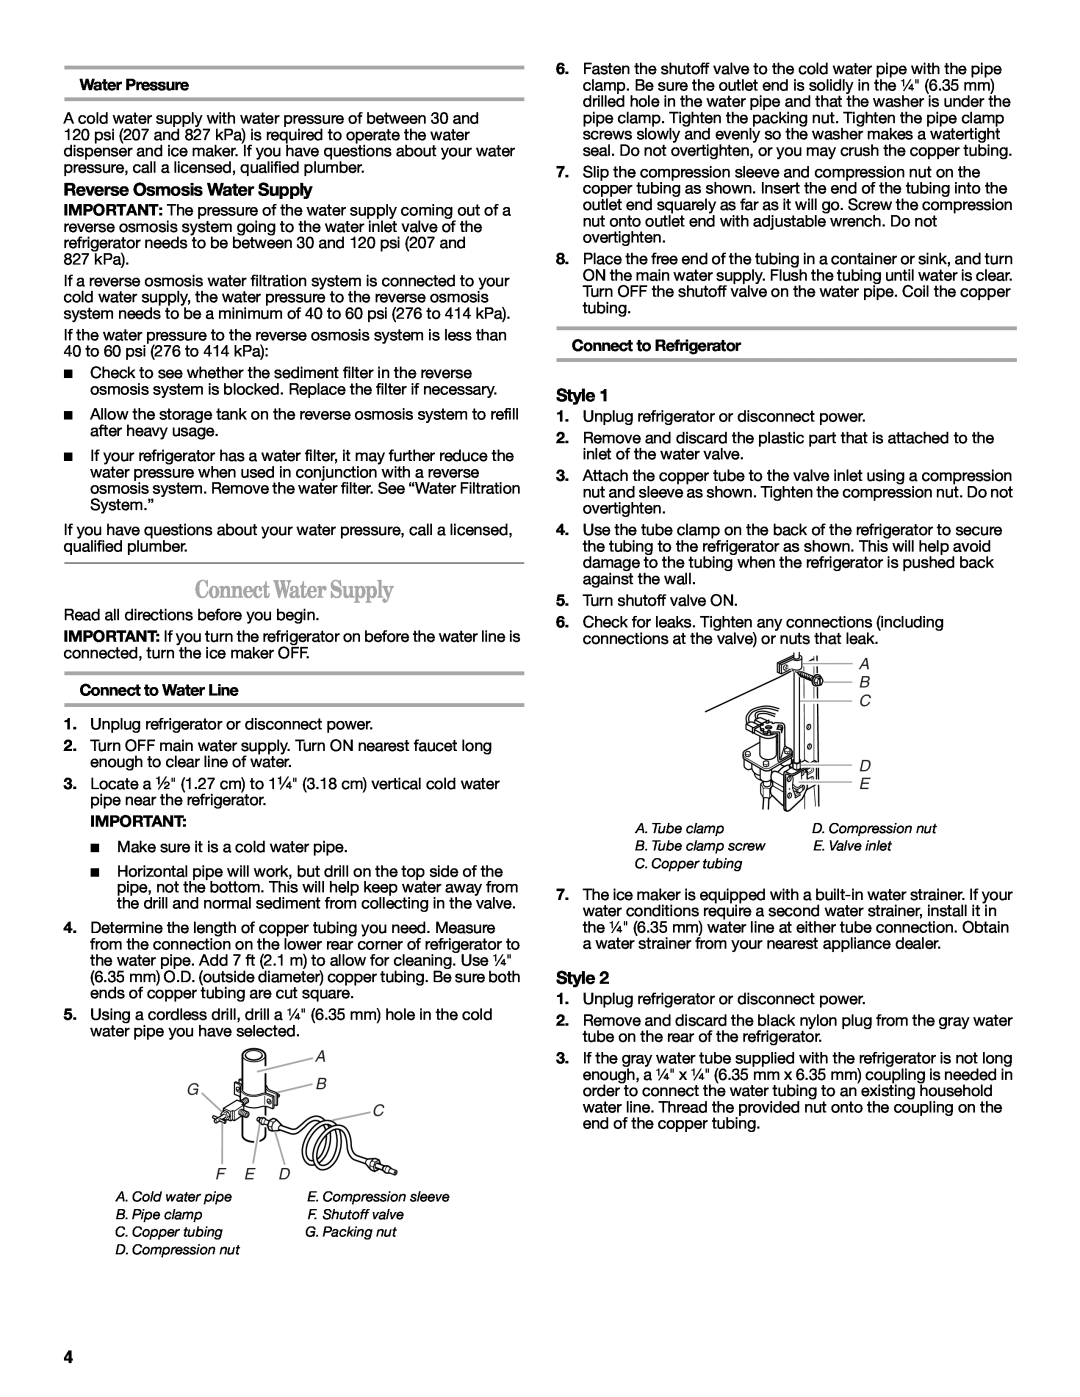 Amana W10316638A installation instructions Connect Water Supply, Reverse Osmosis Water Supply, Style 